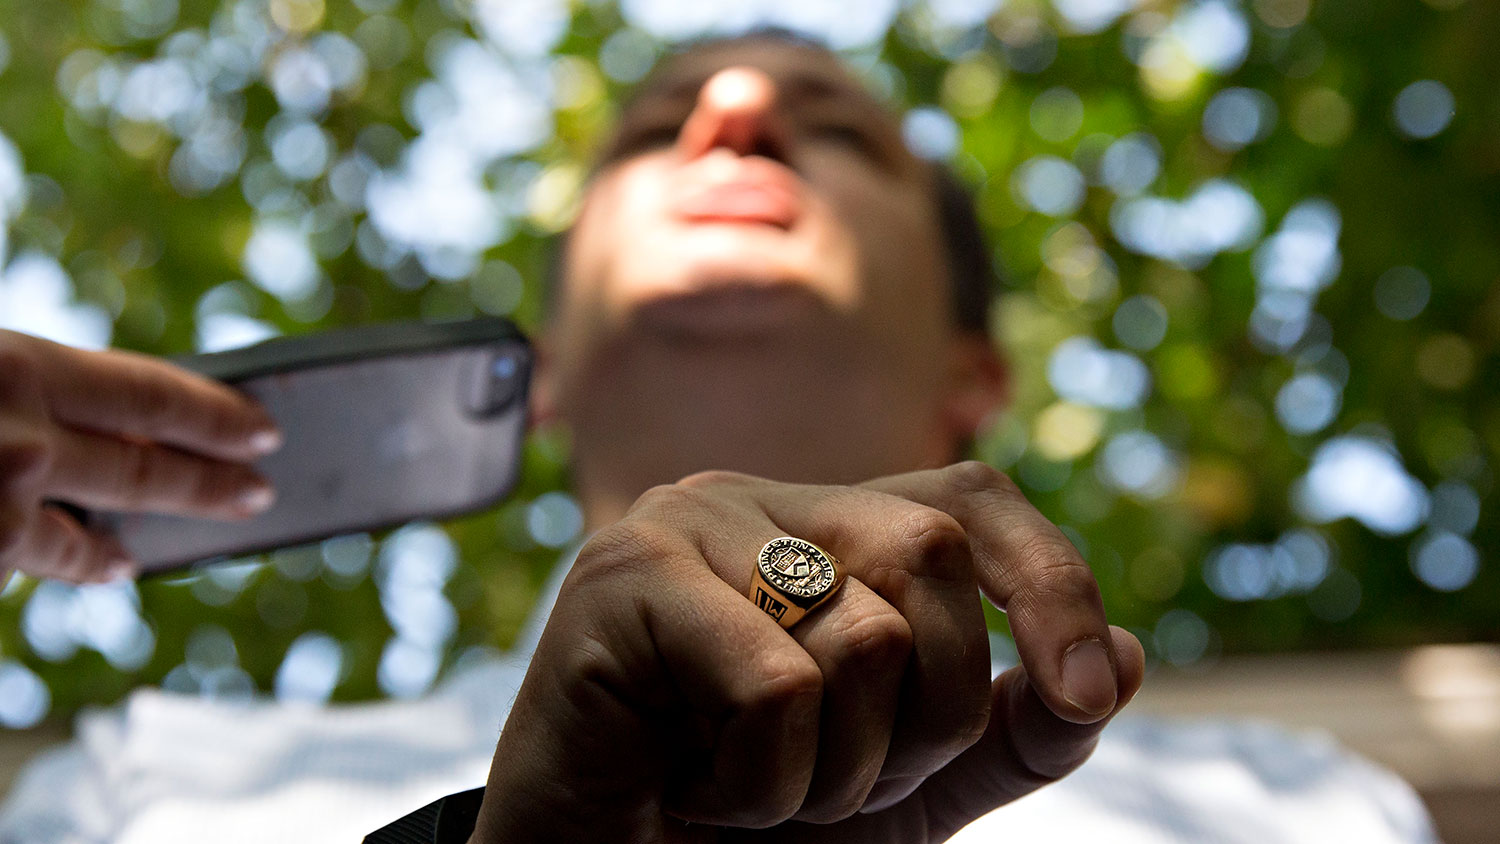 Senator Ted Cruz wears a Princeton University ring as he speaks to the media during the Iowa State Fair in Des Moines on Aug. 21, 2015.
